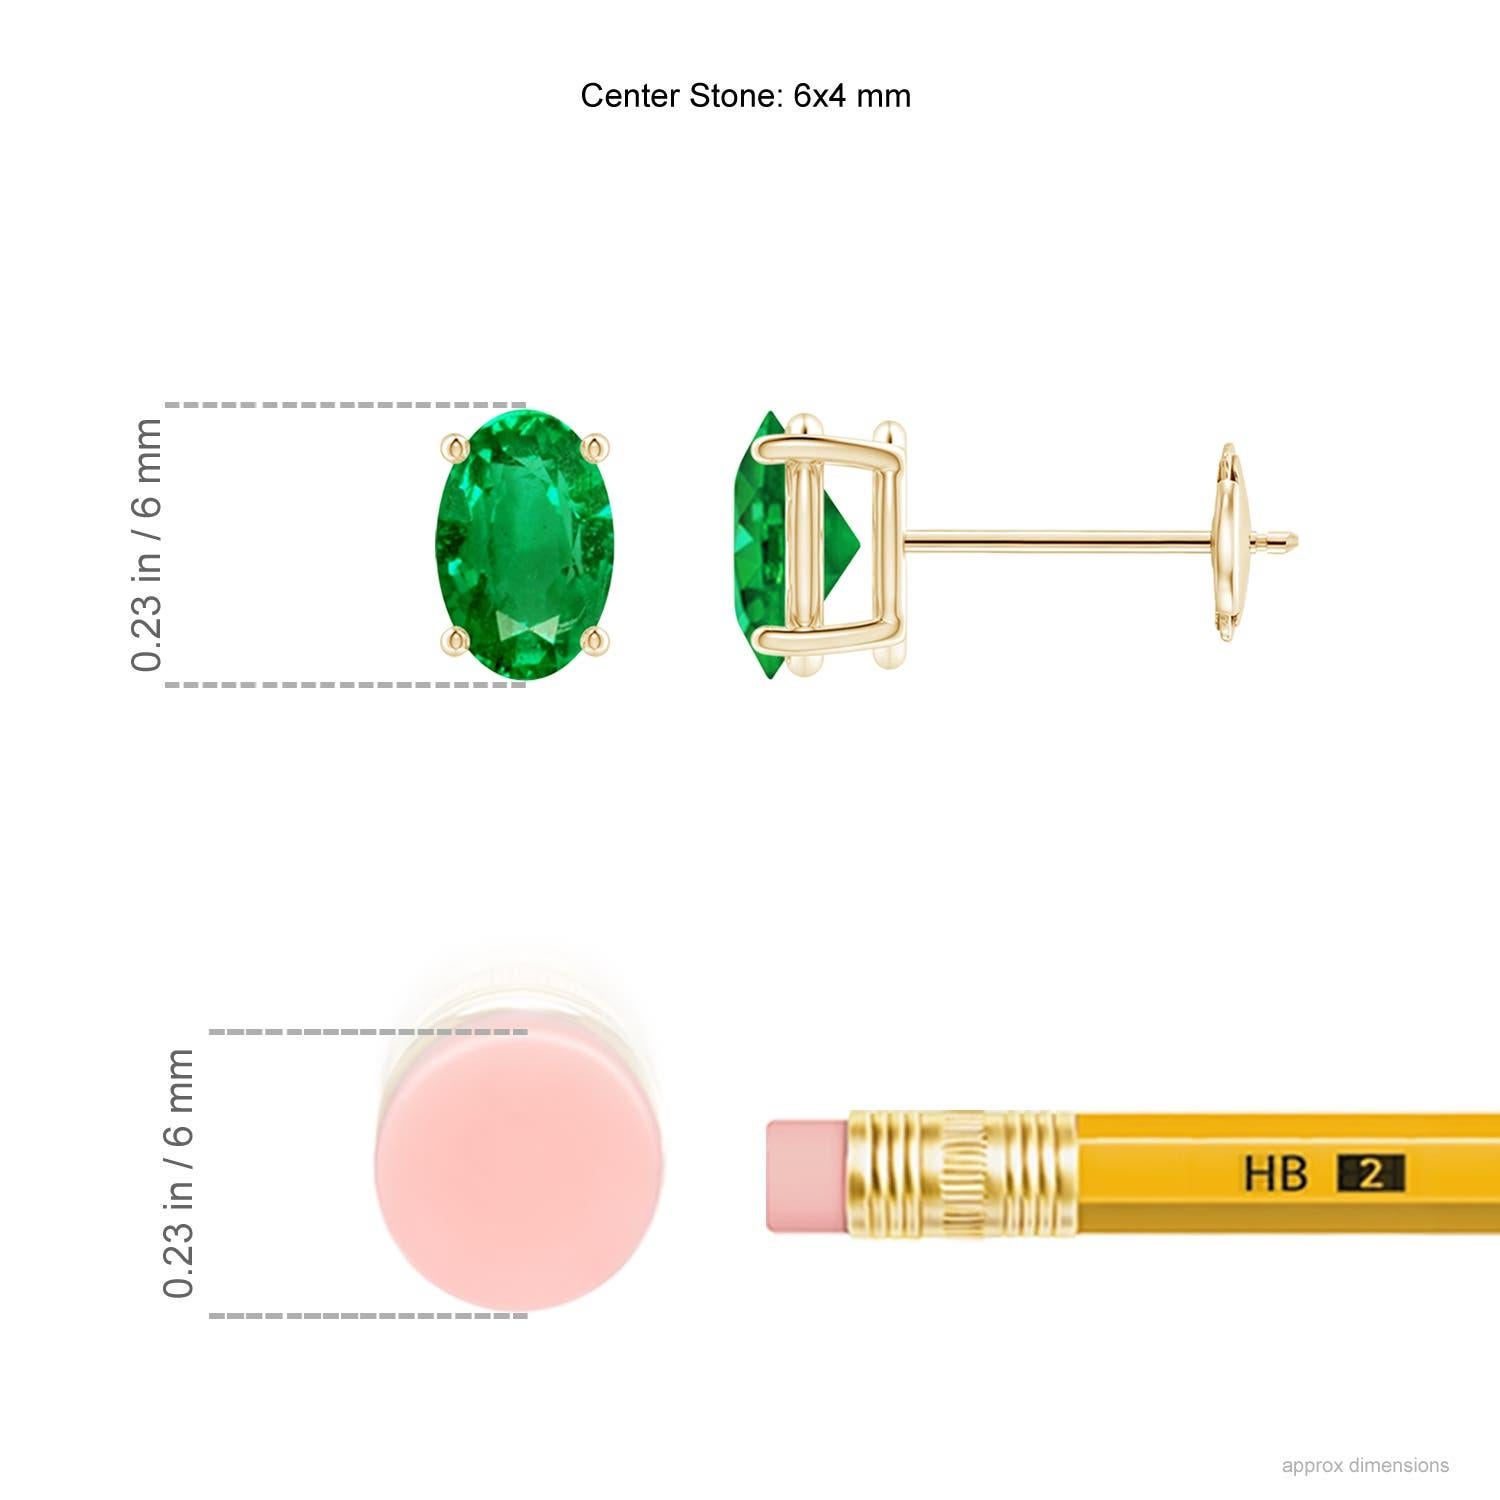 This pair of solitaire emerald stud earrings crafted in 14k yellow gold is simple yet stunning. The oval emerald sits in a prong setting and captivates with its rich green hue.
Emerald is the Birthstone for May and traditional gift for 20th, 35th &